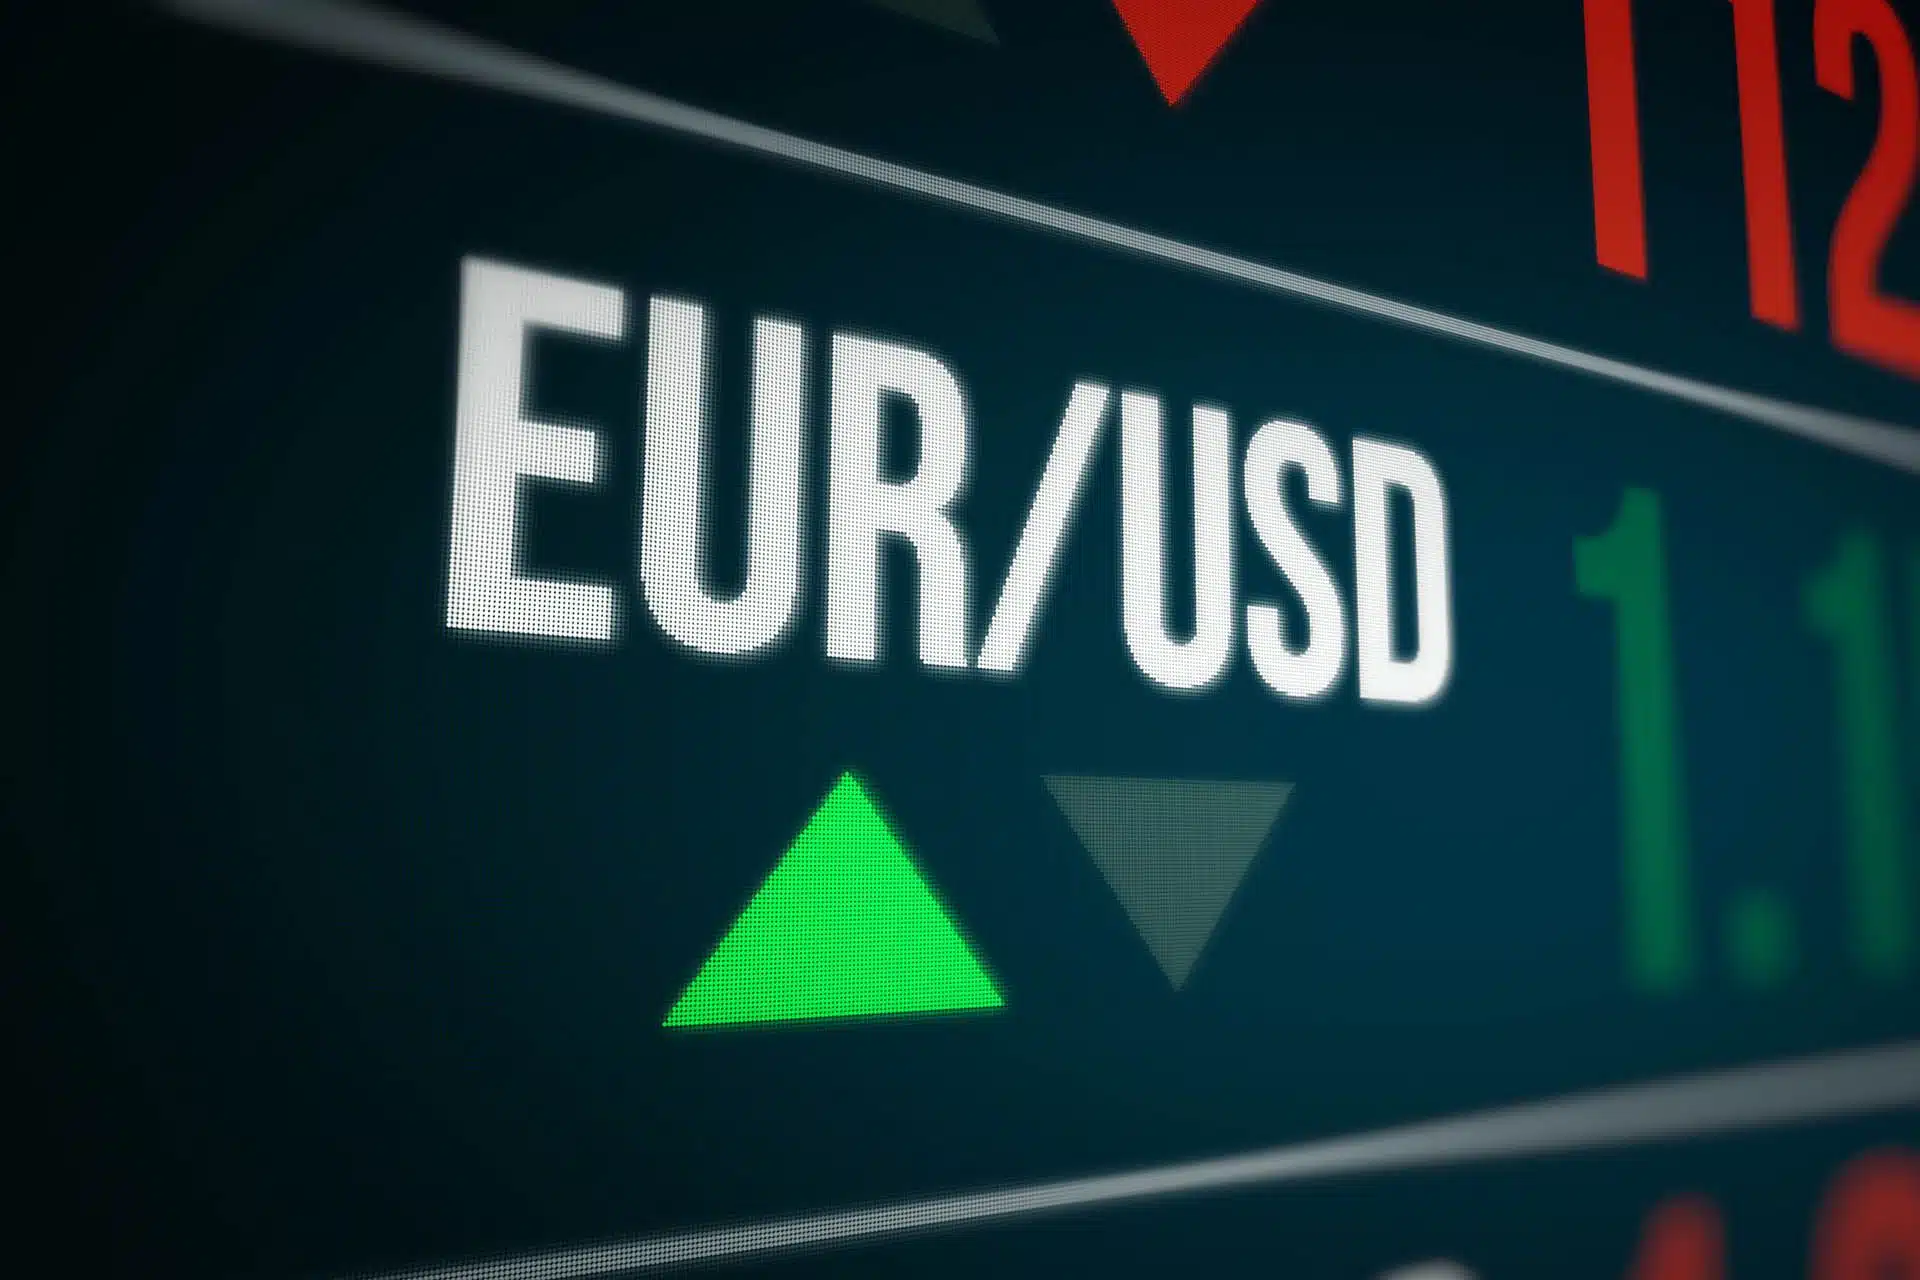 There Is More Upside on the Low End for the EUR/USD Pair, Which Extends Recent Declines